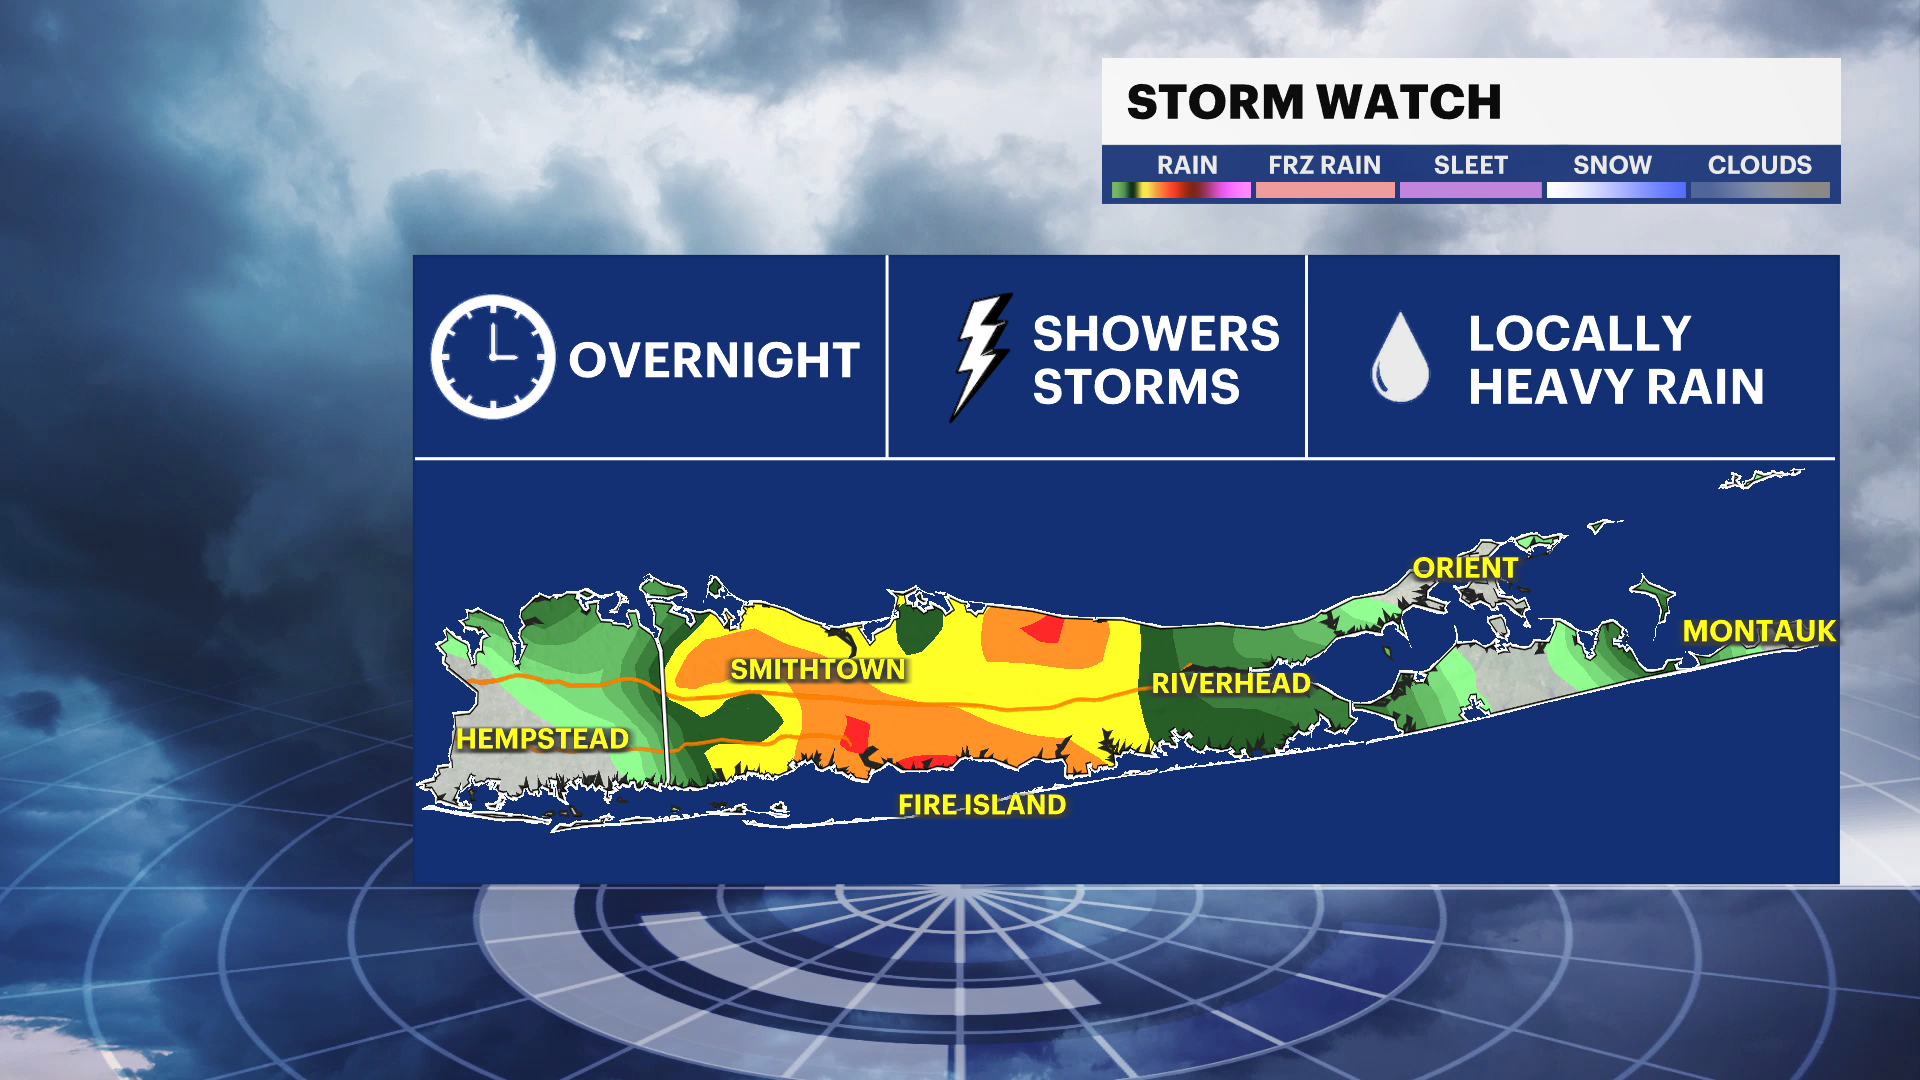 STORM WATCH: Showers and storms arrive overnight into Thursday